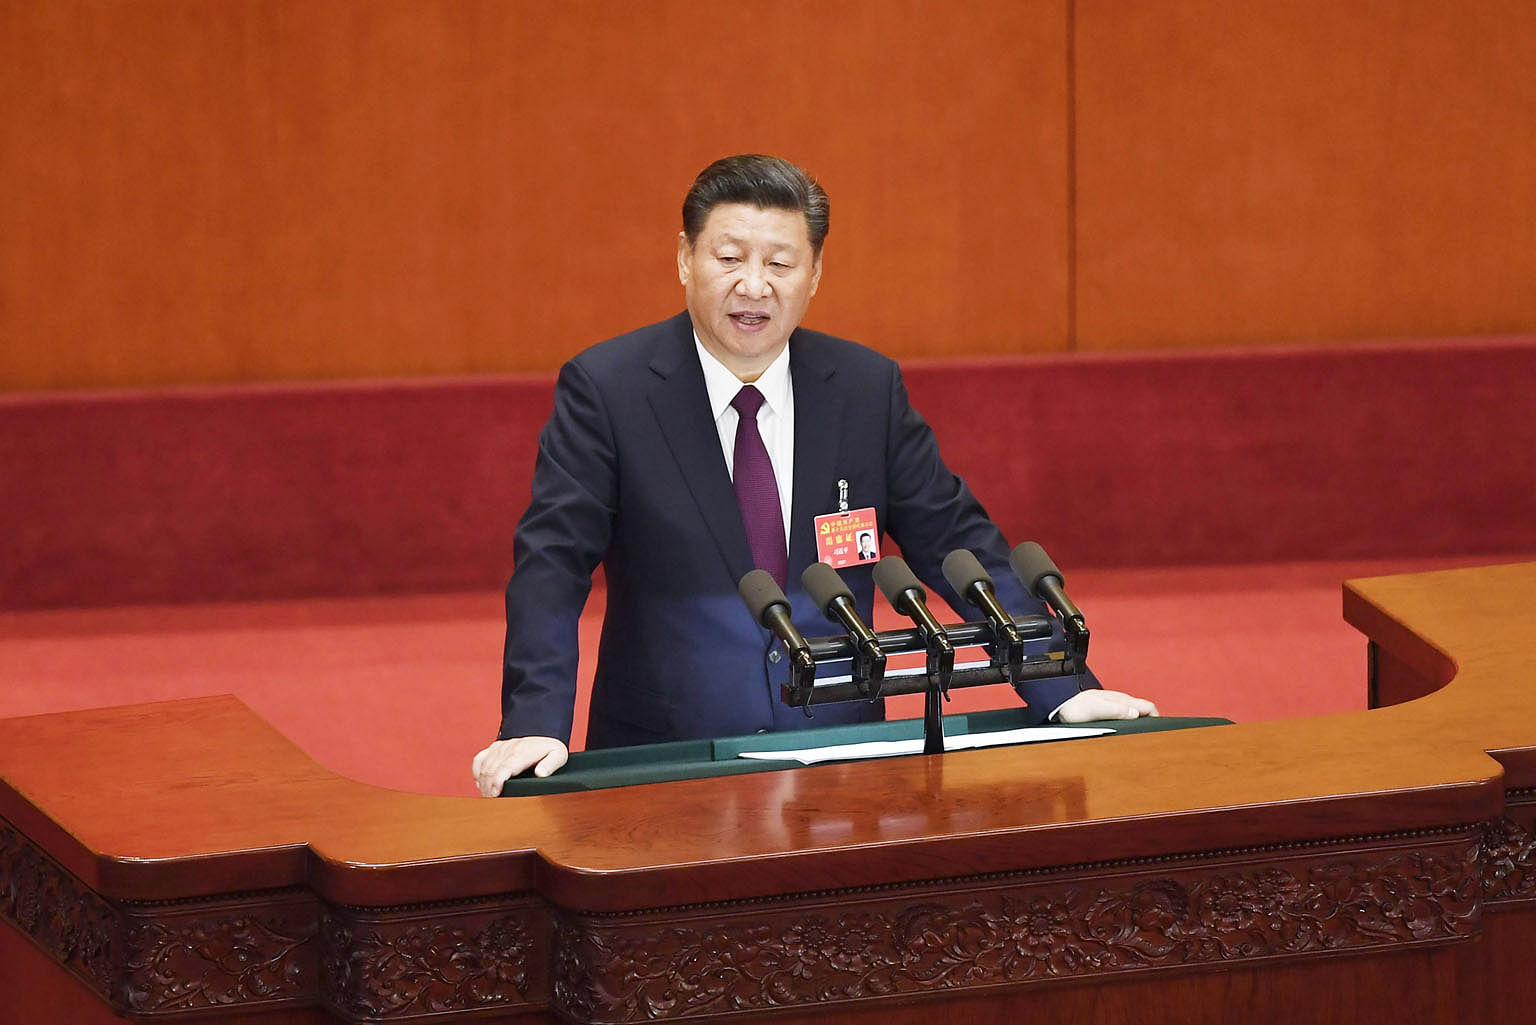 Chinese President Xi Jinping delivering a speech at the opening session of the Chinese Communist Party's Congress in Beijing on Oct 18. Mr Xi's most prominent policy initiative since he took power in 2012 has been his anti-corruption campaign.